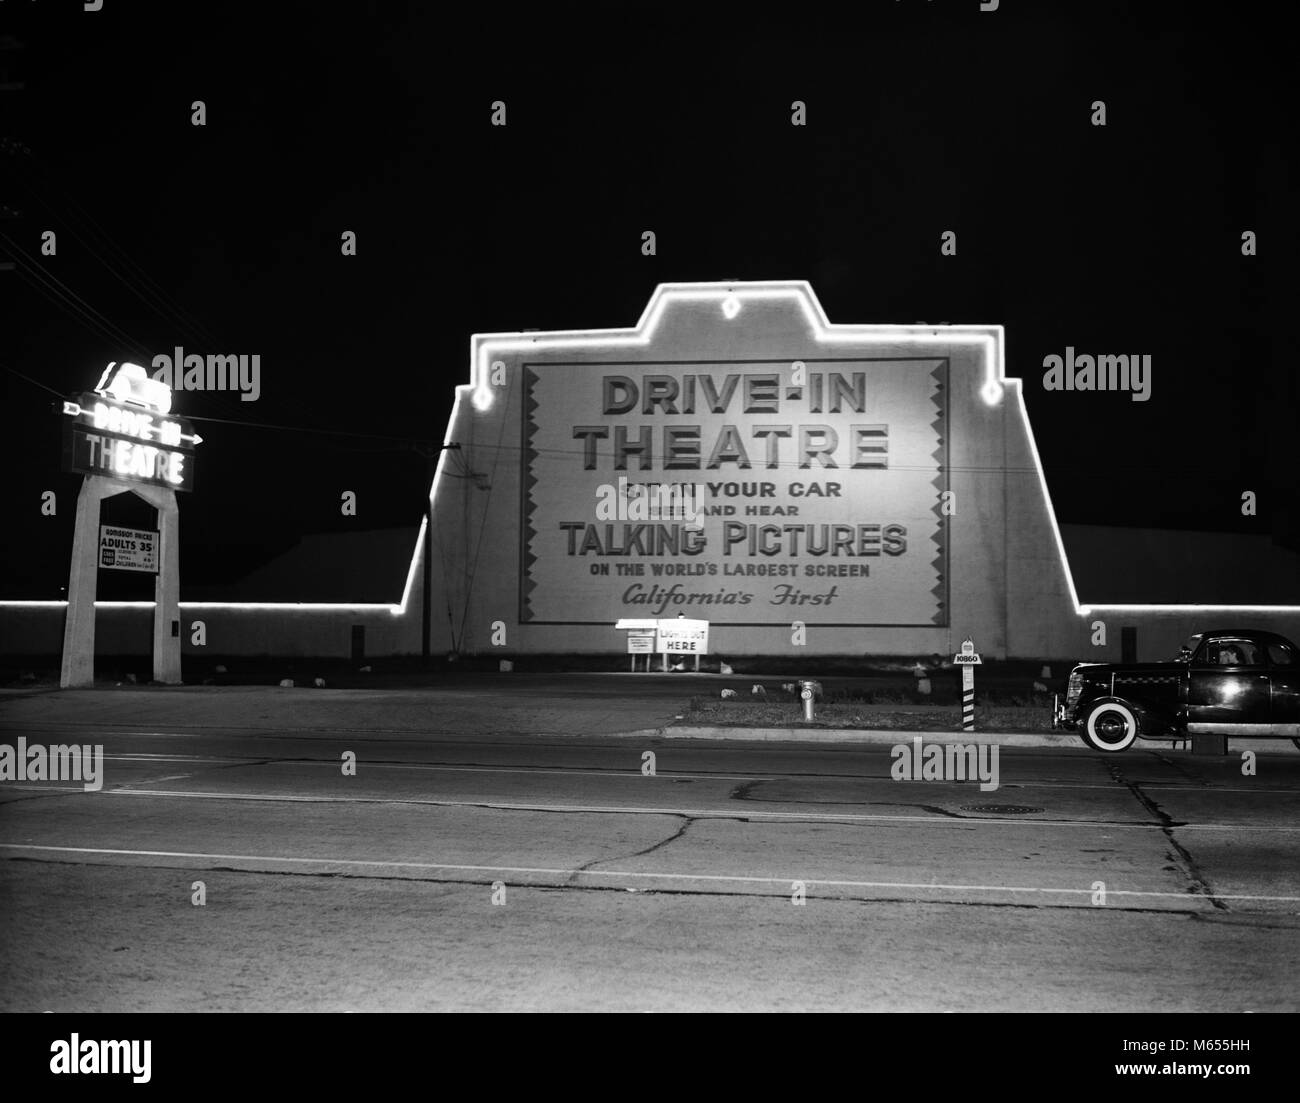 1940s MARQUEE SIGN FOR DRIVE-IN MOVIE THEATER LIT UP AT NIGHT - asp ap 8915 ASP001 HARS TALKING PICTURES Stock Photo